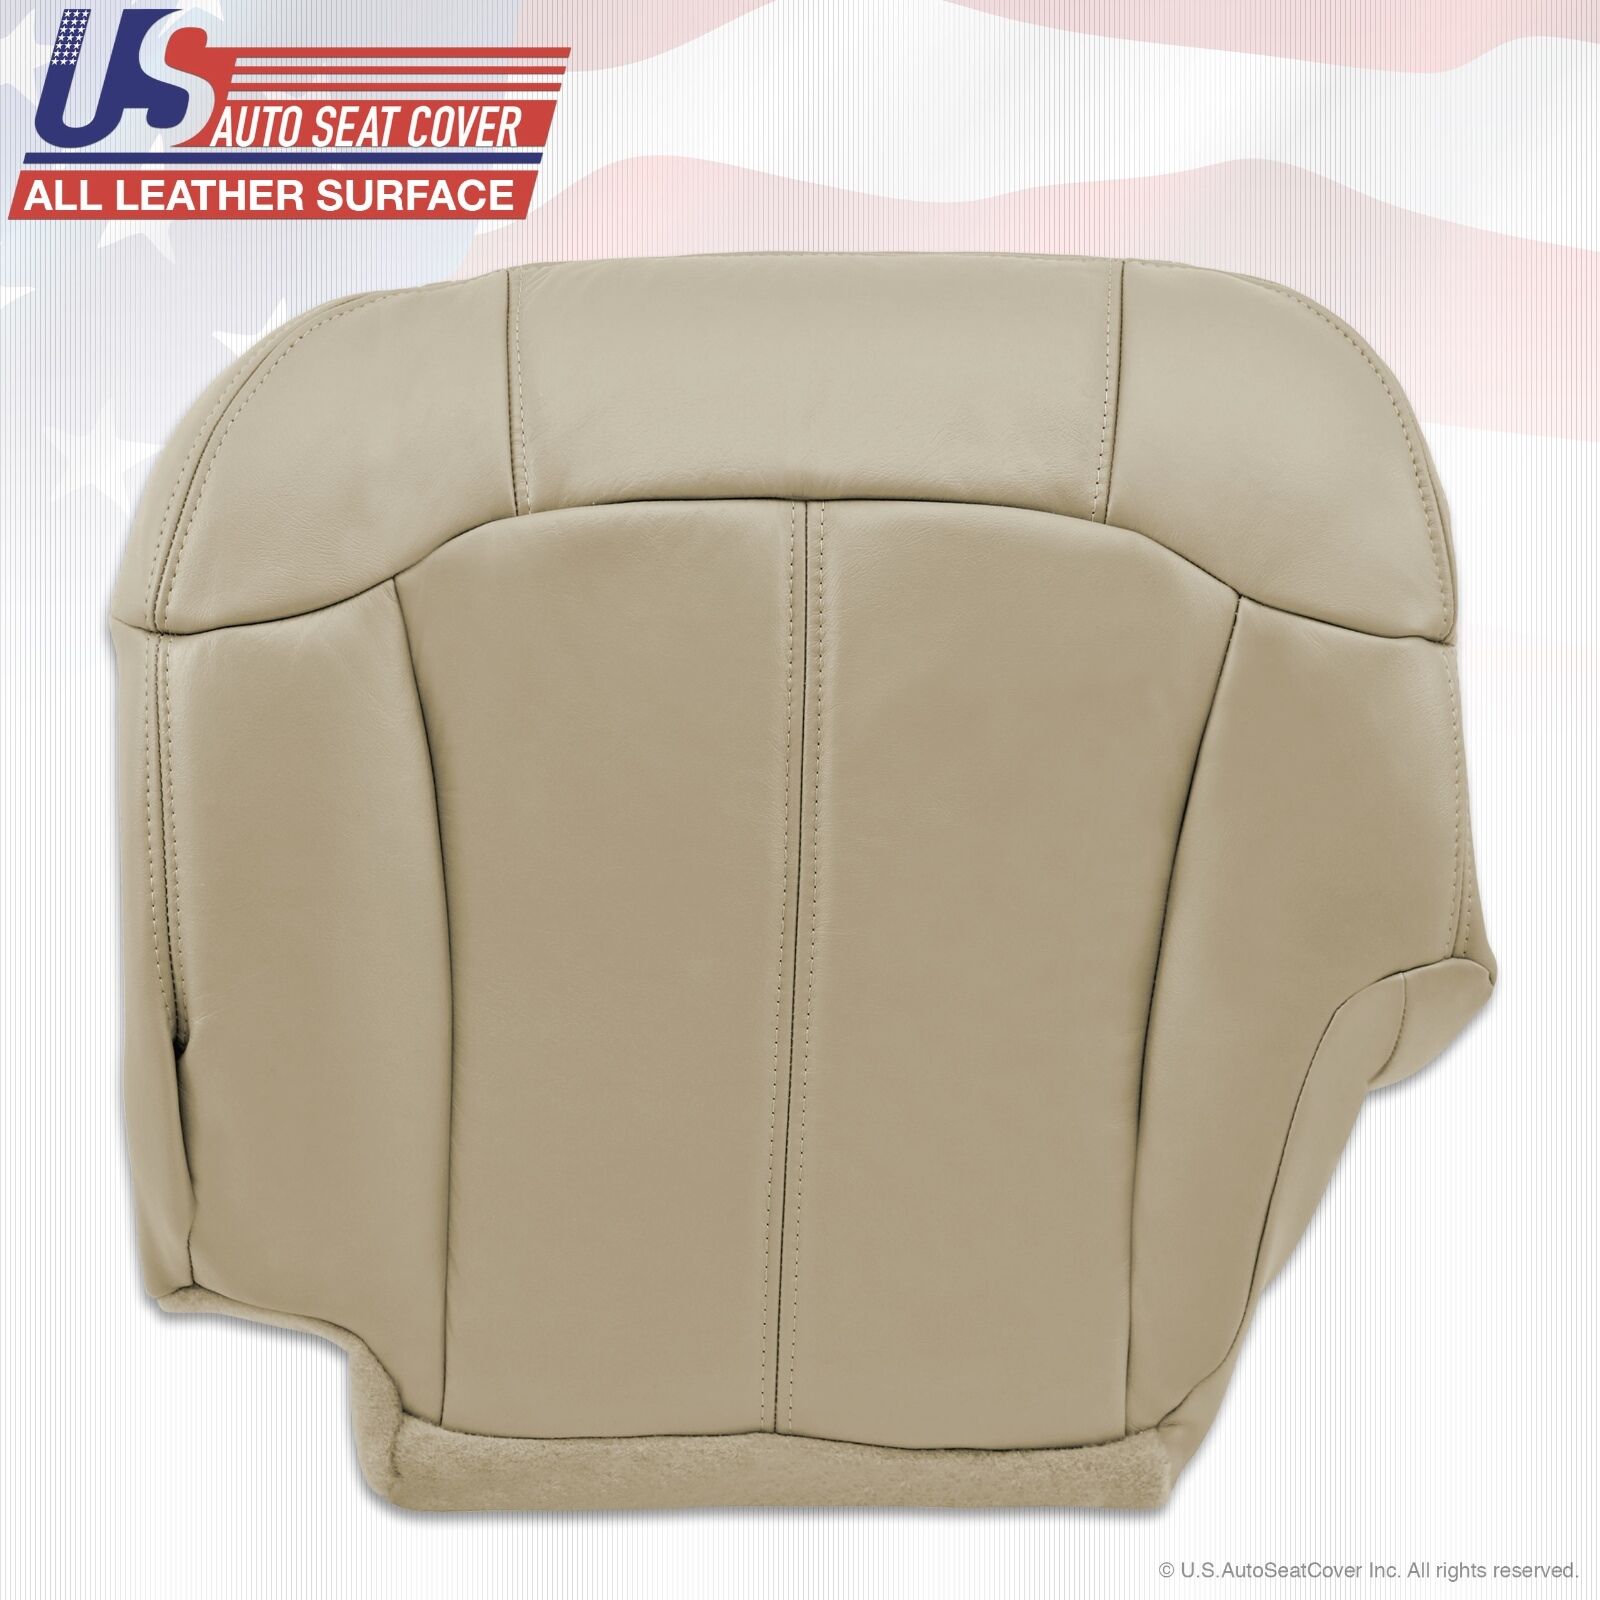 1999 2000 2001 2002 Chevy Tahoe Suburban Upholstery leather seat cover Light Tan